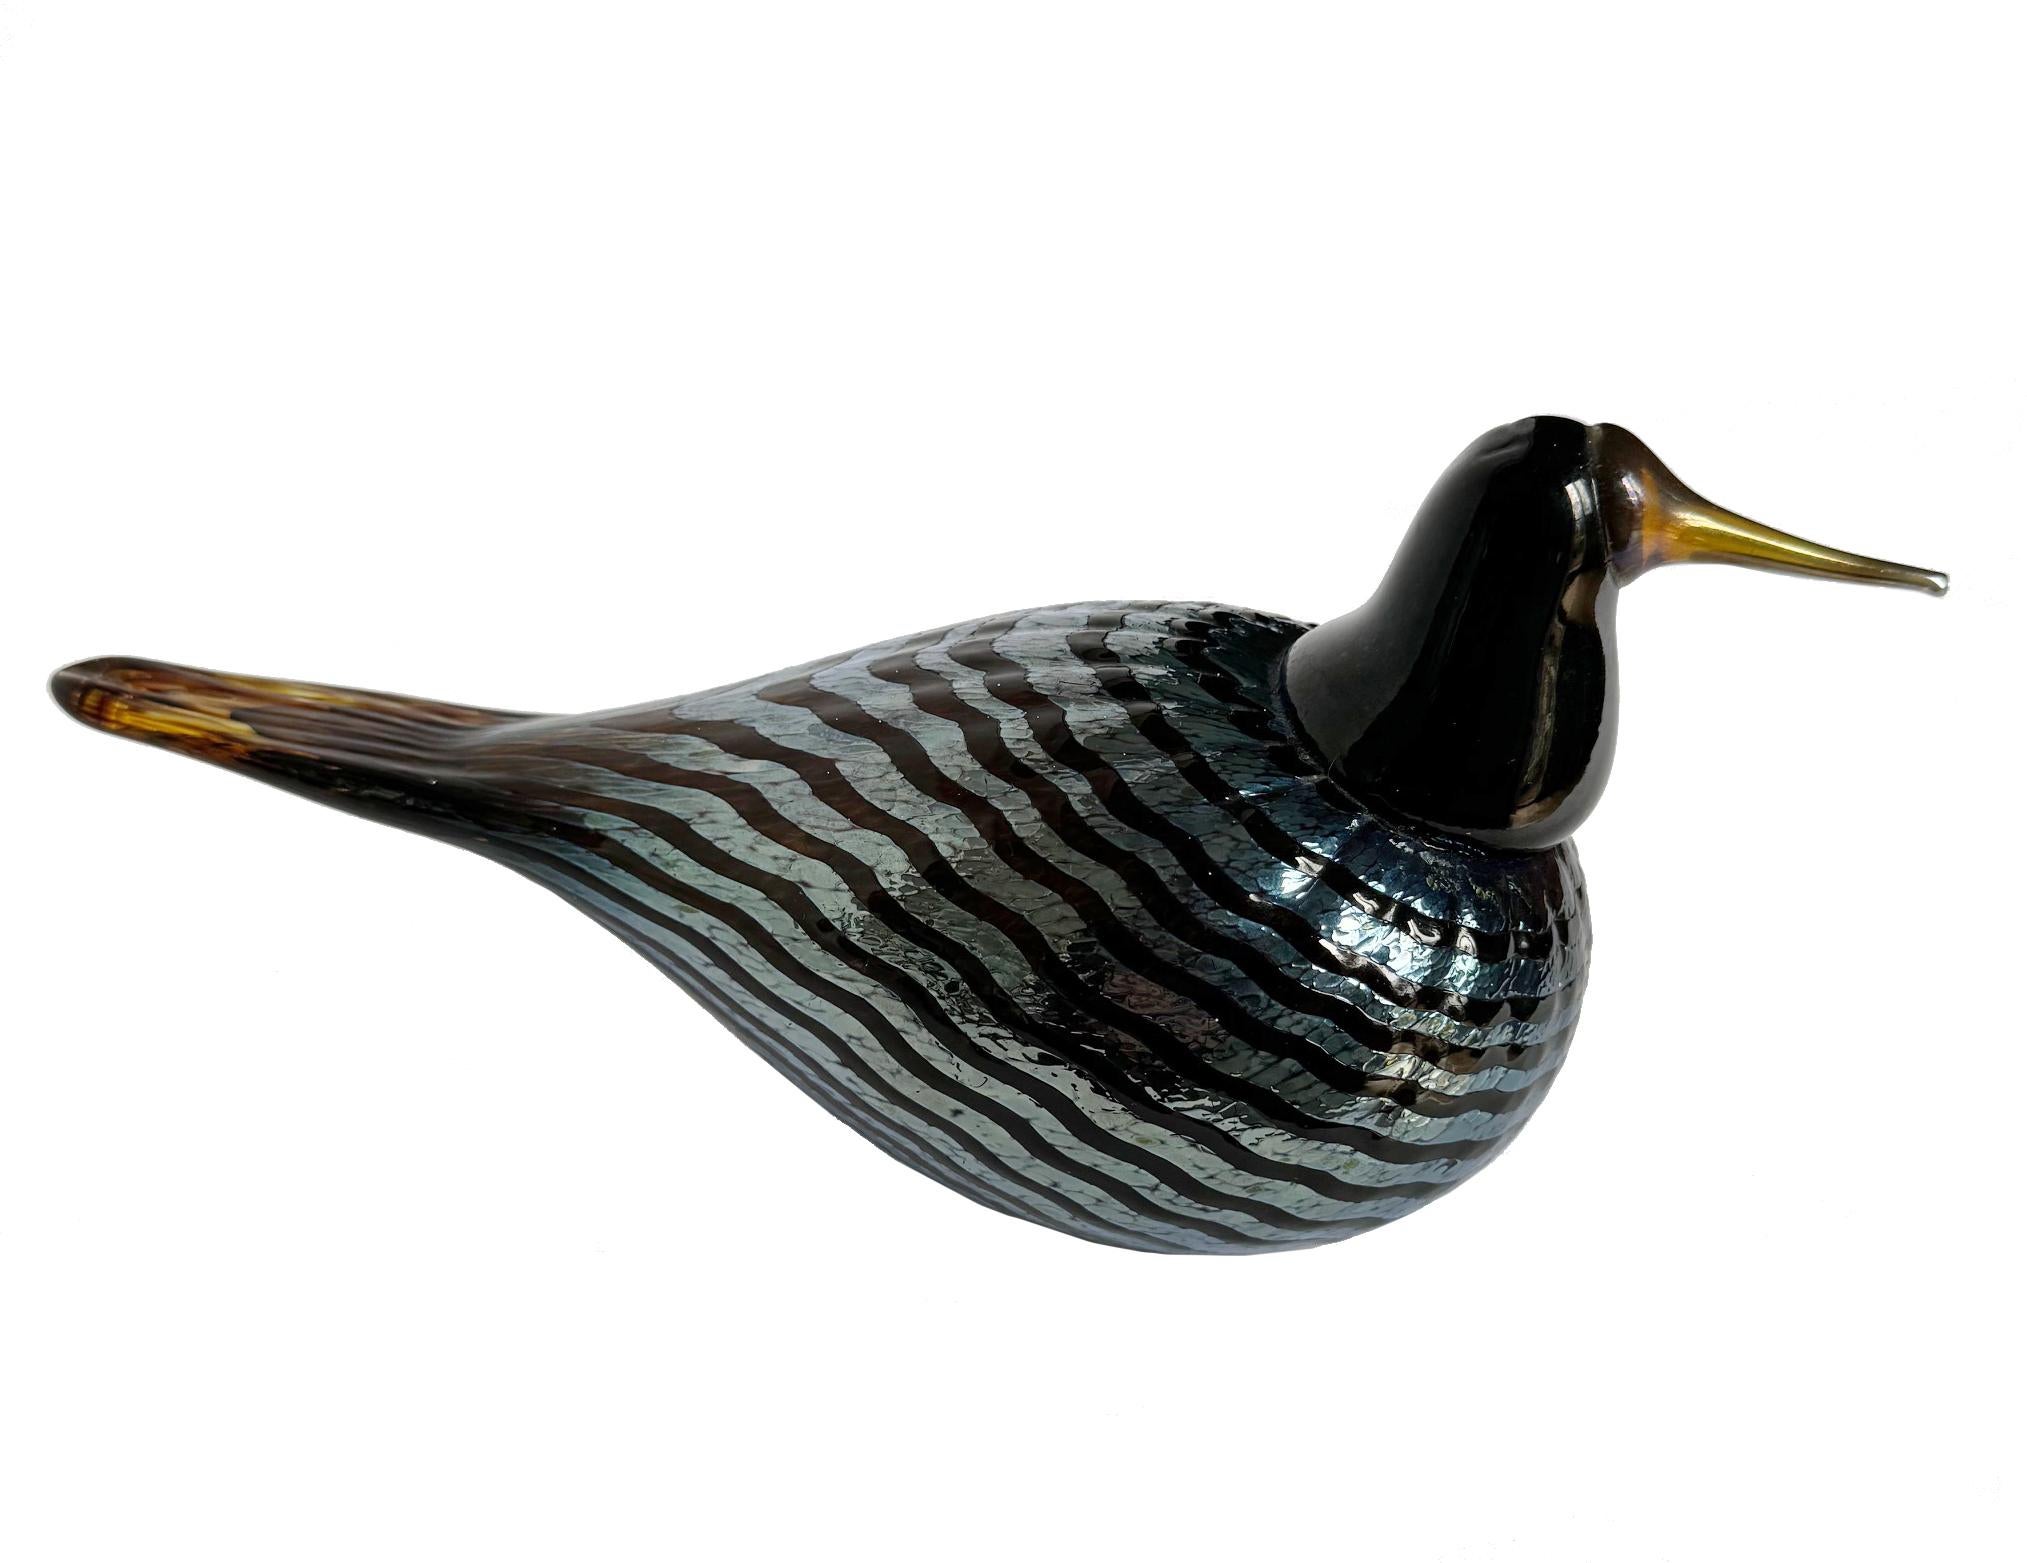 Two Oiva Toikka Art Glass Bird Sculptures, made for Iittala.  Oiva Toikka's birds have become iconic objects for glass collectors worldwide. Each figurine is mouth-blown and handcrafted, giving it its own character and coloring. Both of the birds is